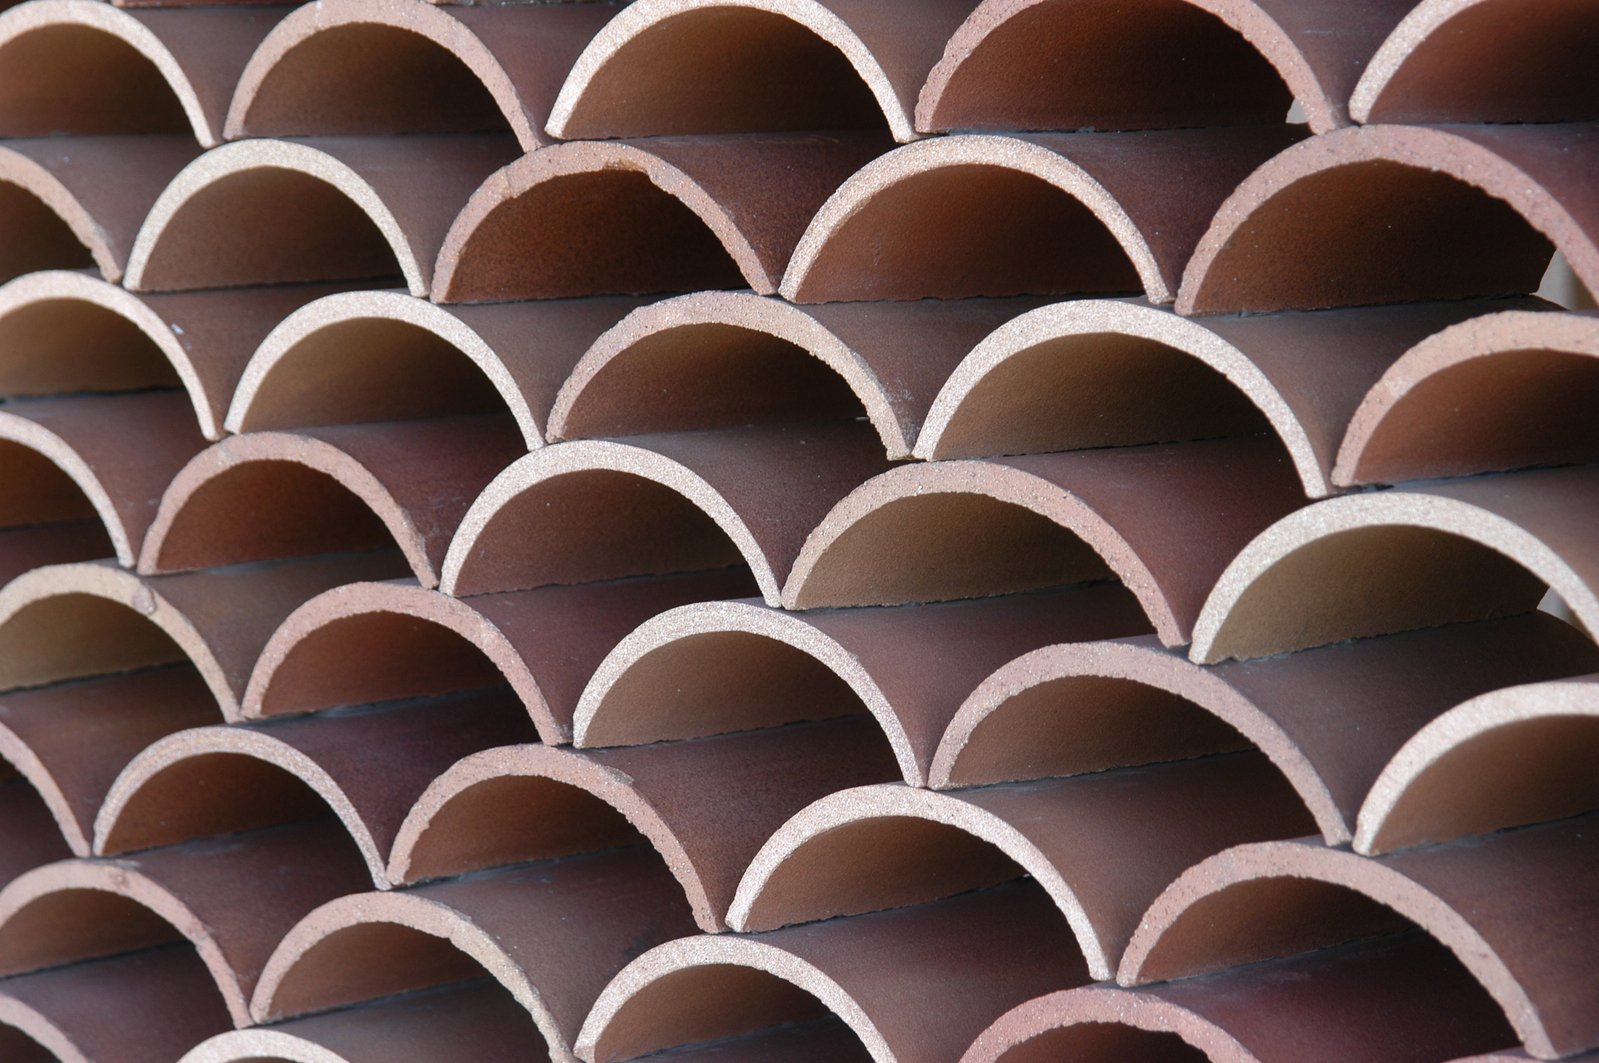 the side view of pipes arranged in a circle